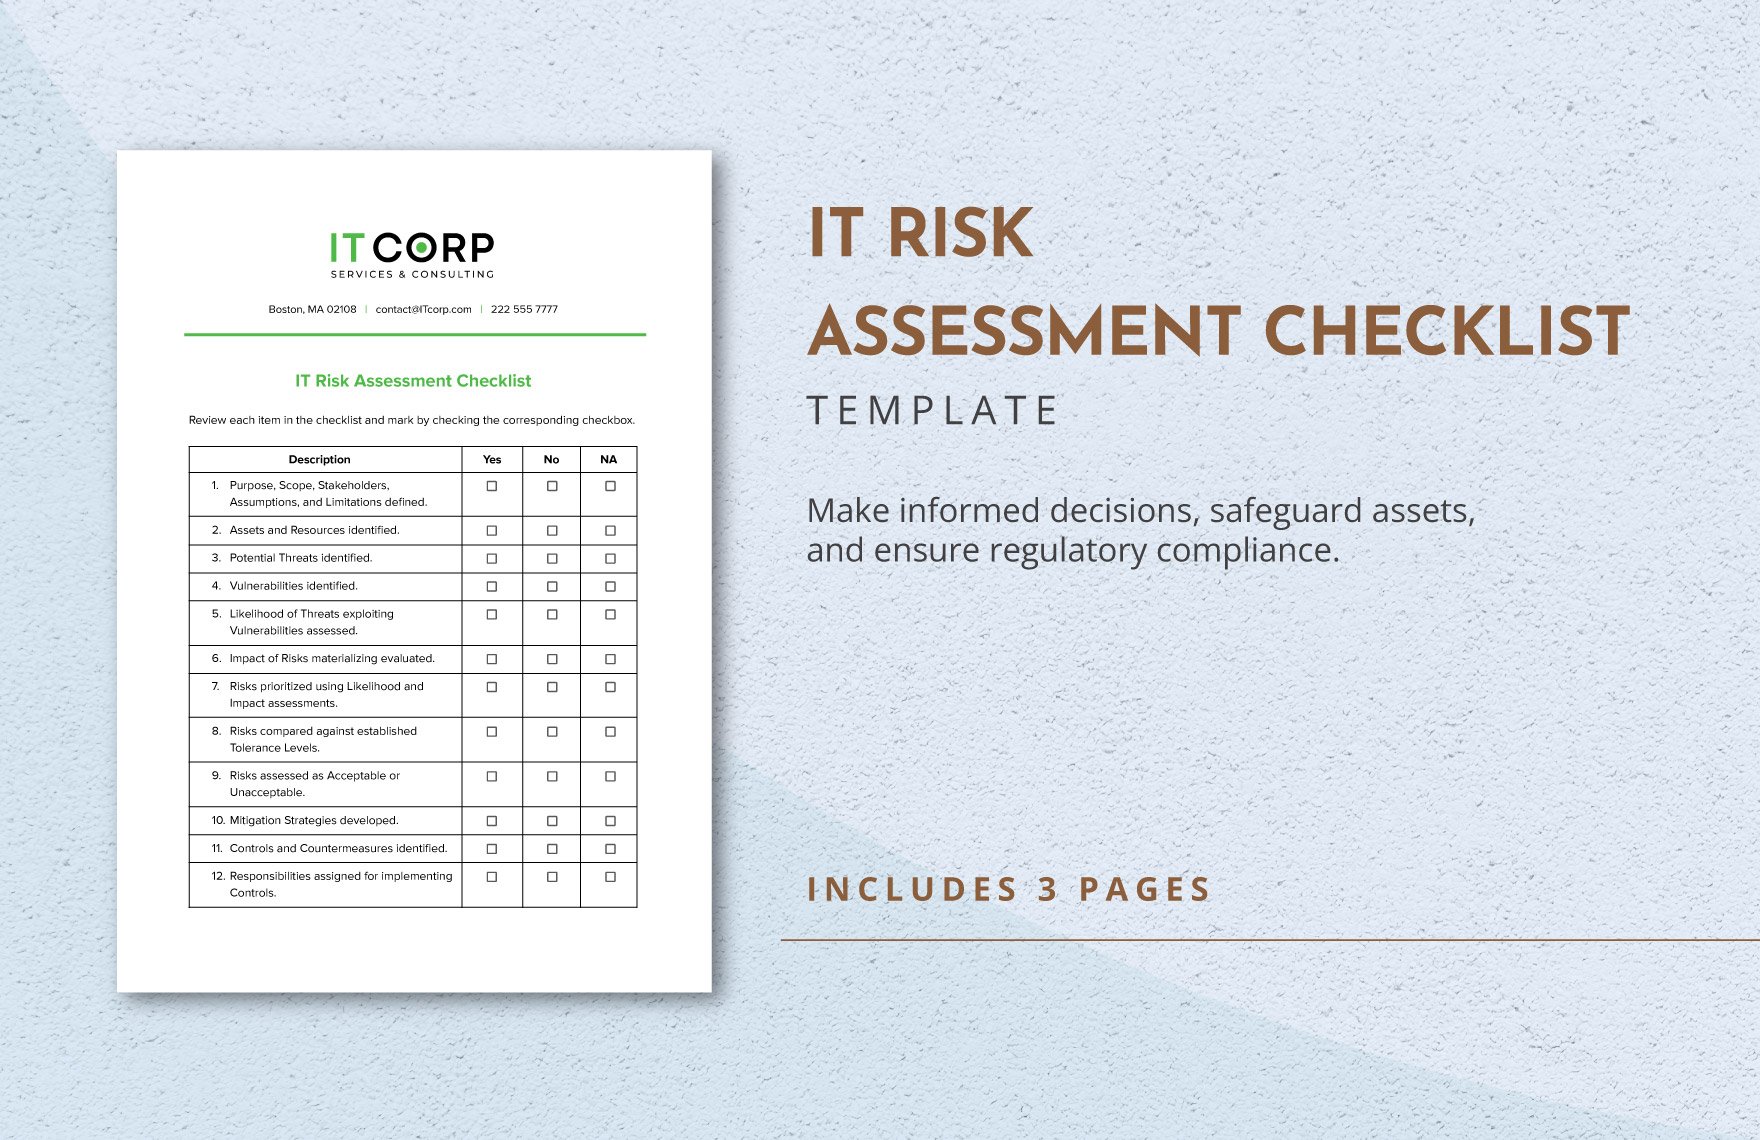 IT Risk Assessment Checklist Template in Word, Google Docs, PDF